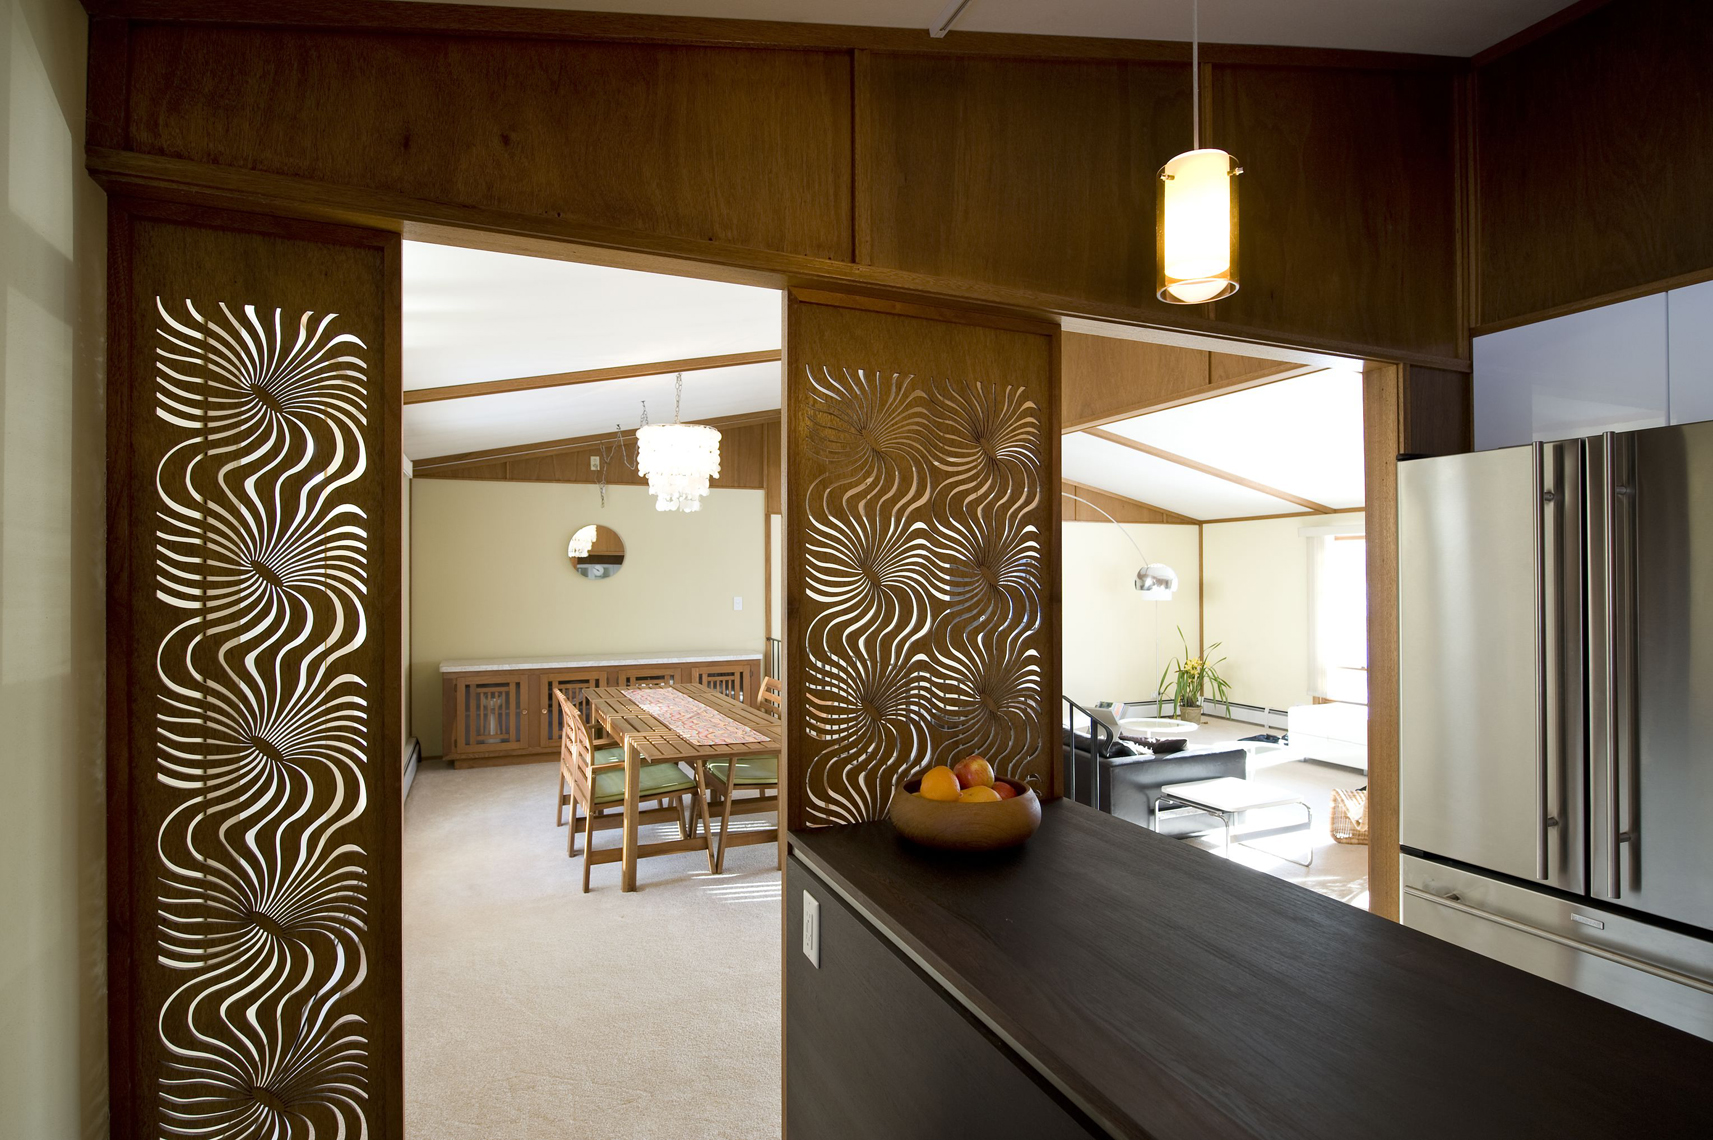 Graphic wood panel dividers into living area